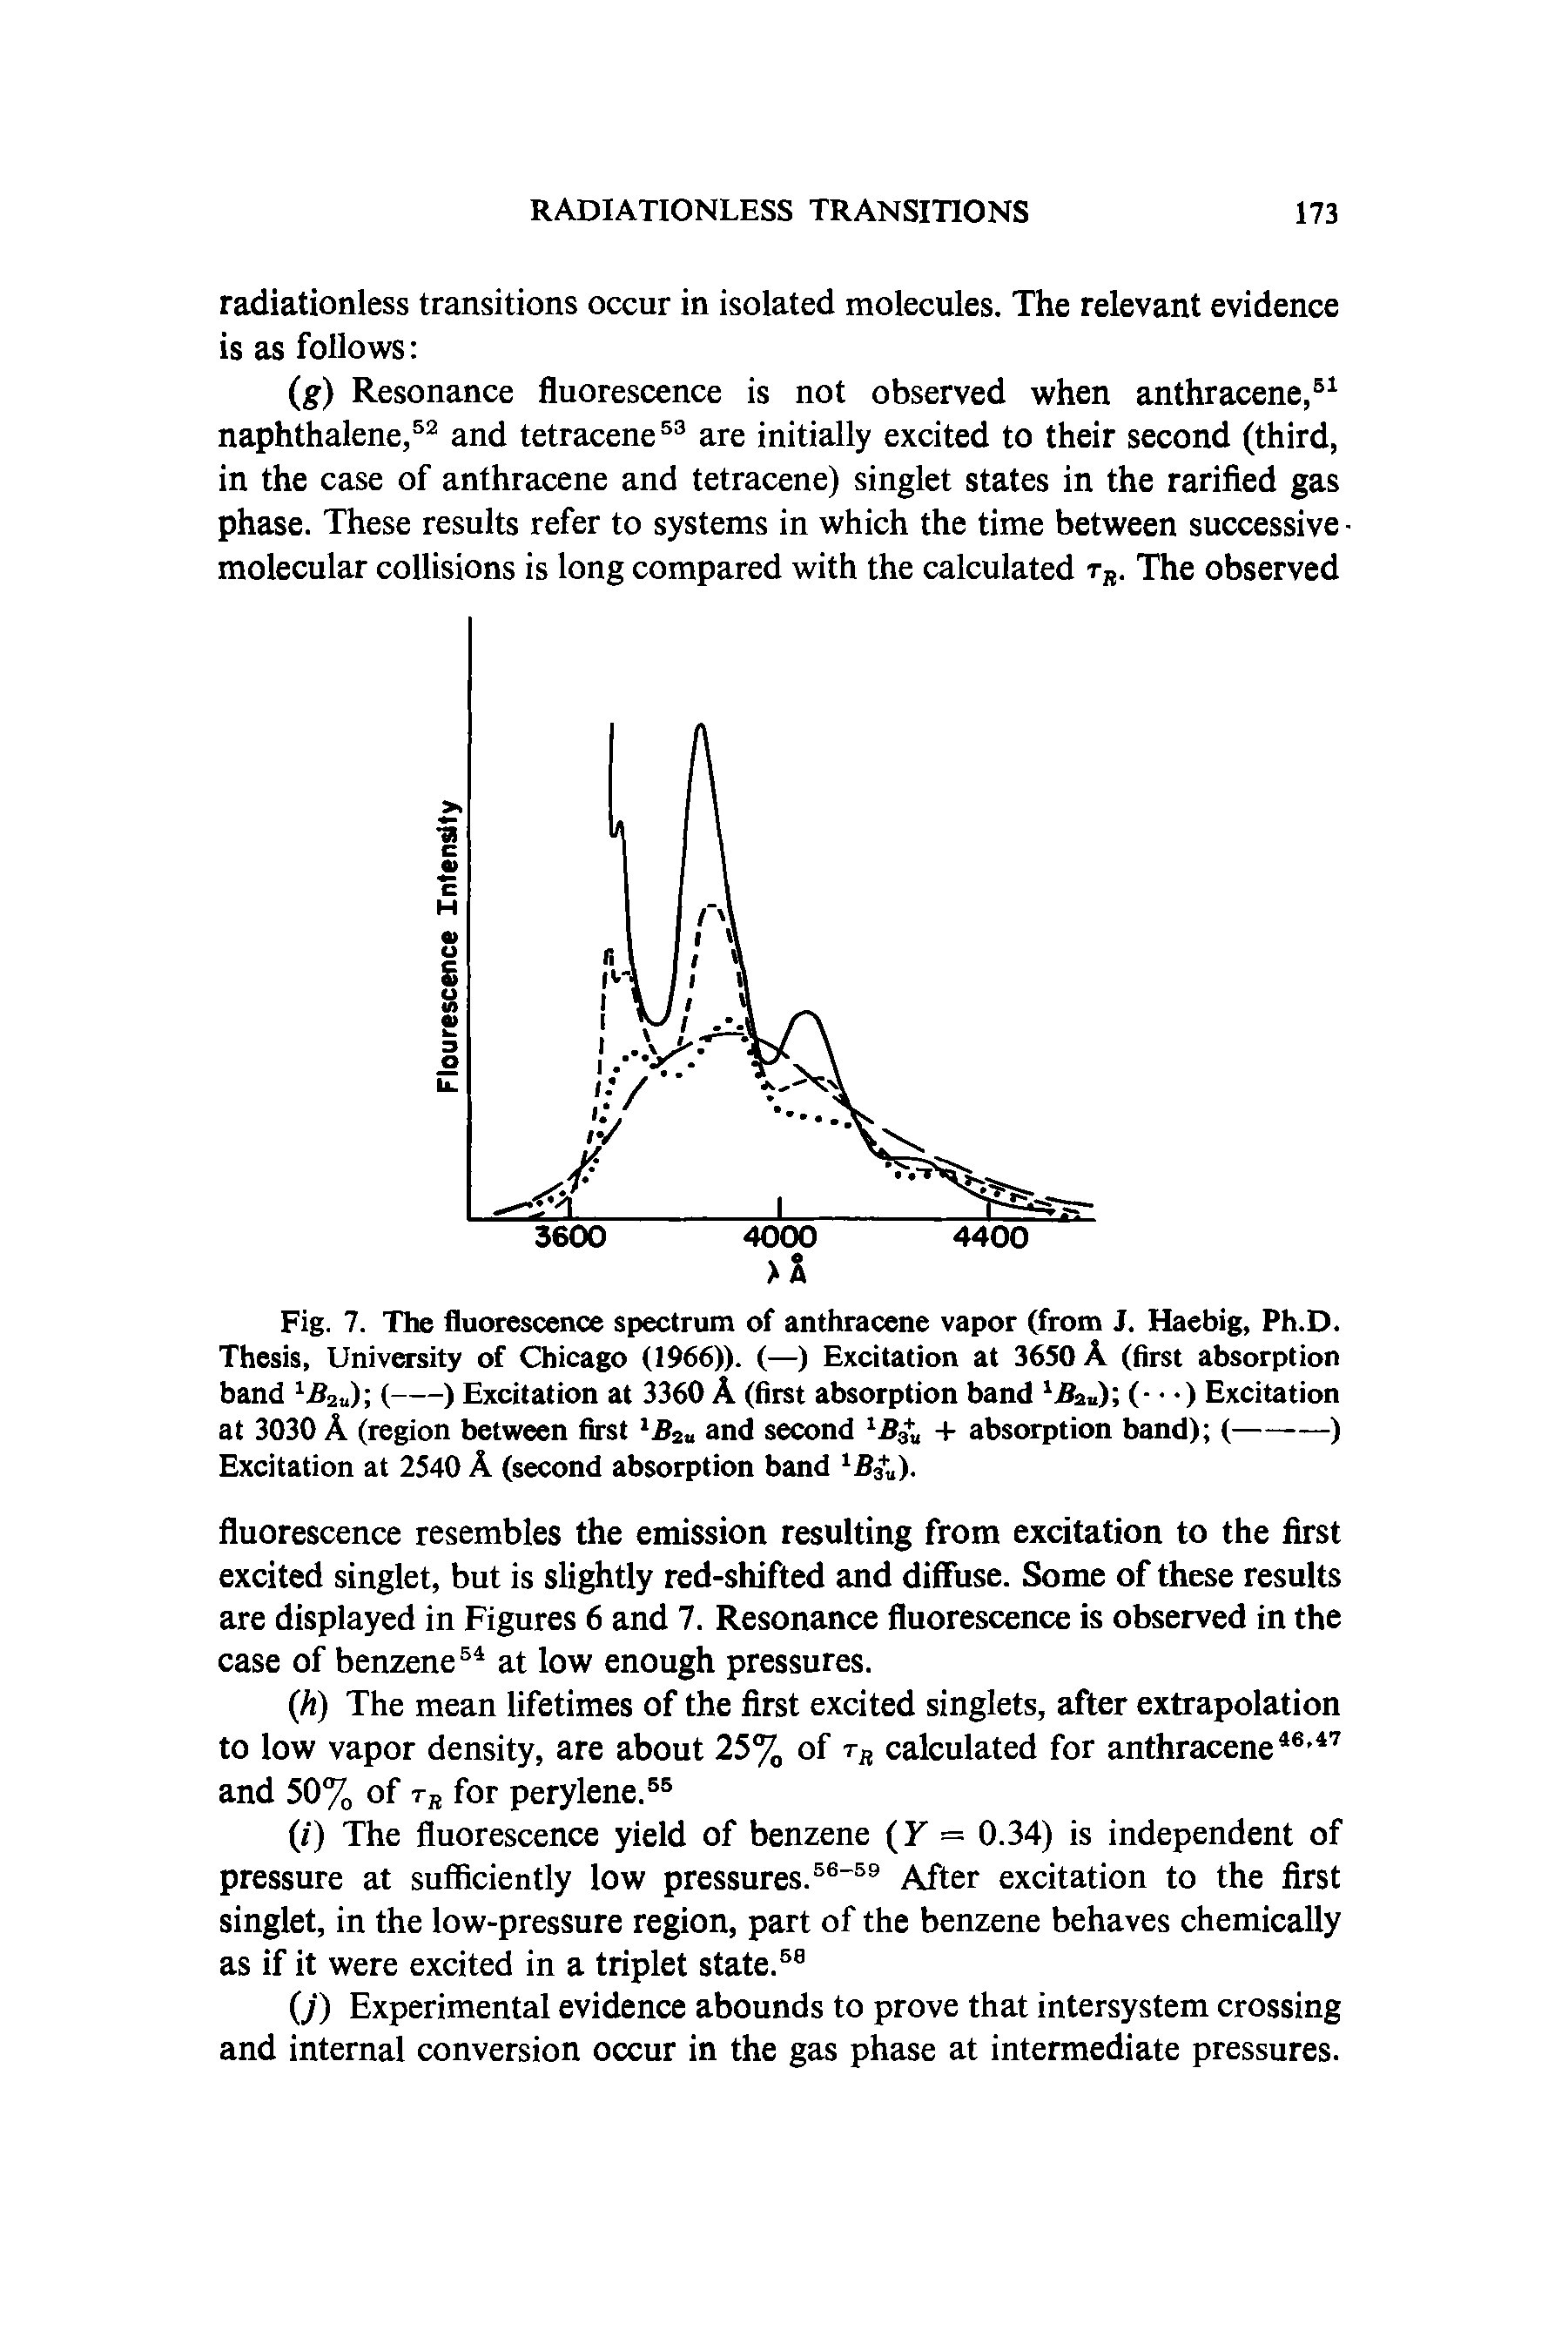 Fig. 7. The fluorescence spectrum of anthracene vapor (from J. Haebig, Ph.D. Thesis, University of Chicago (1966)). (—) Excitation at 3650 A (first absorption...